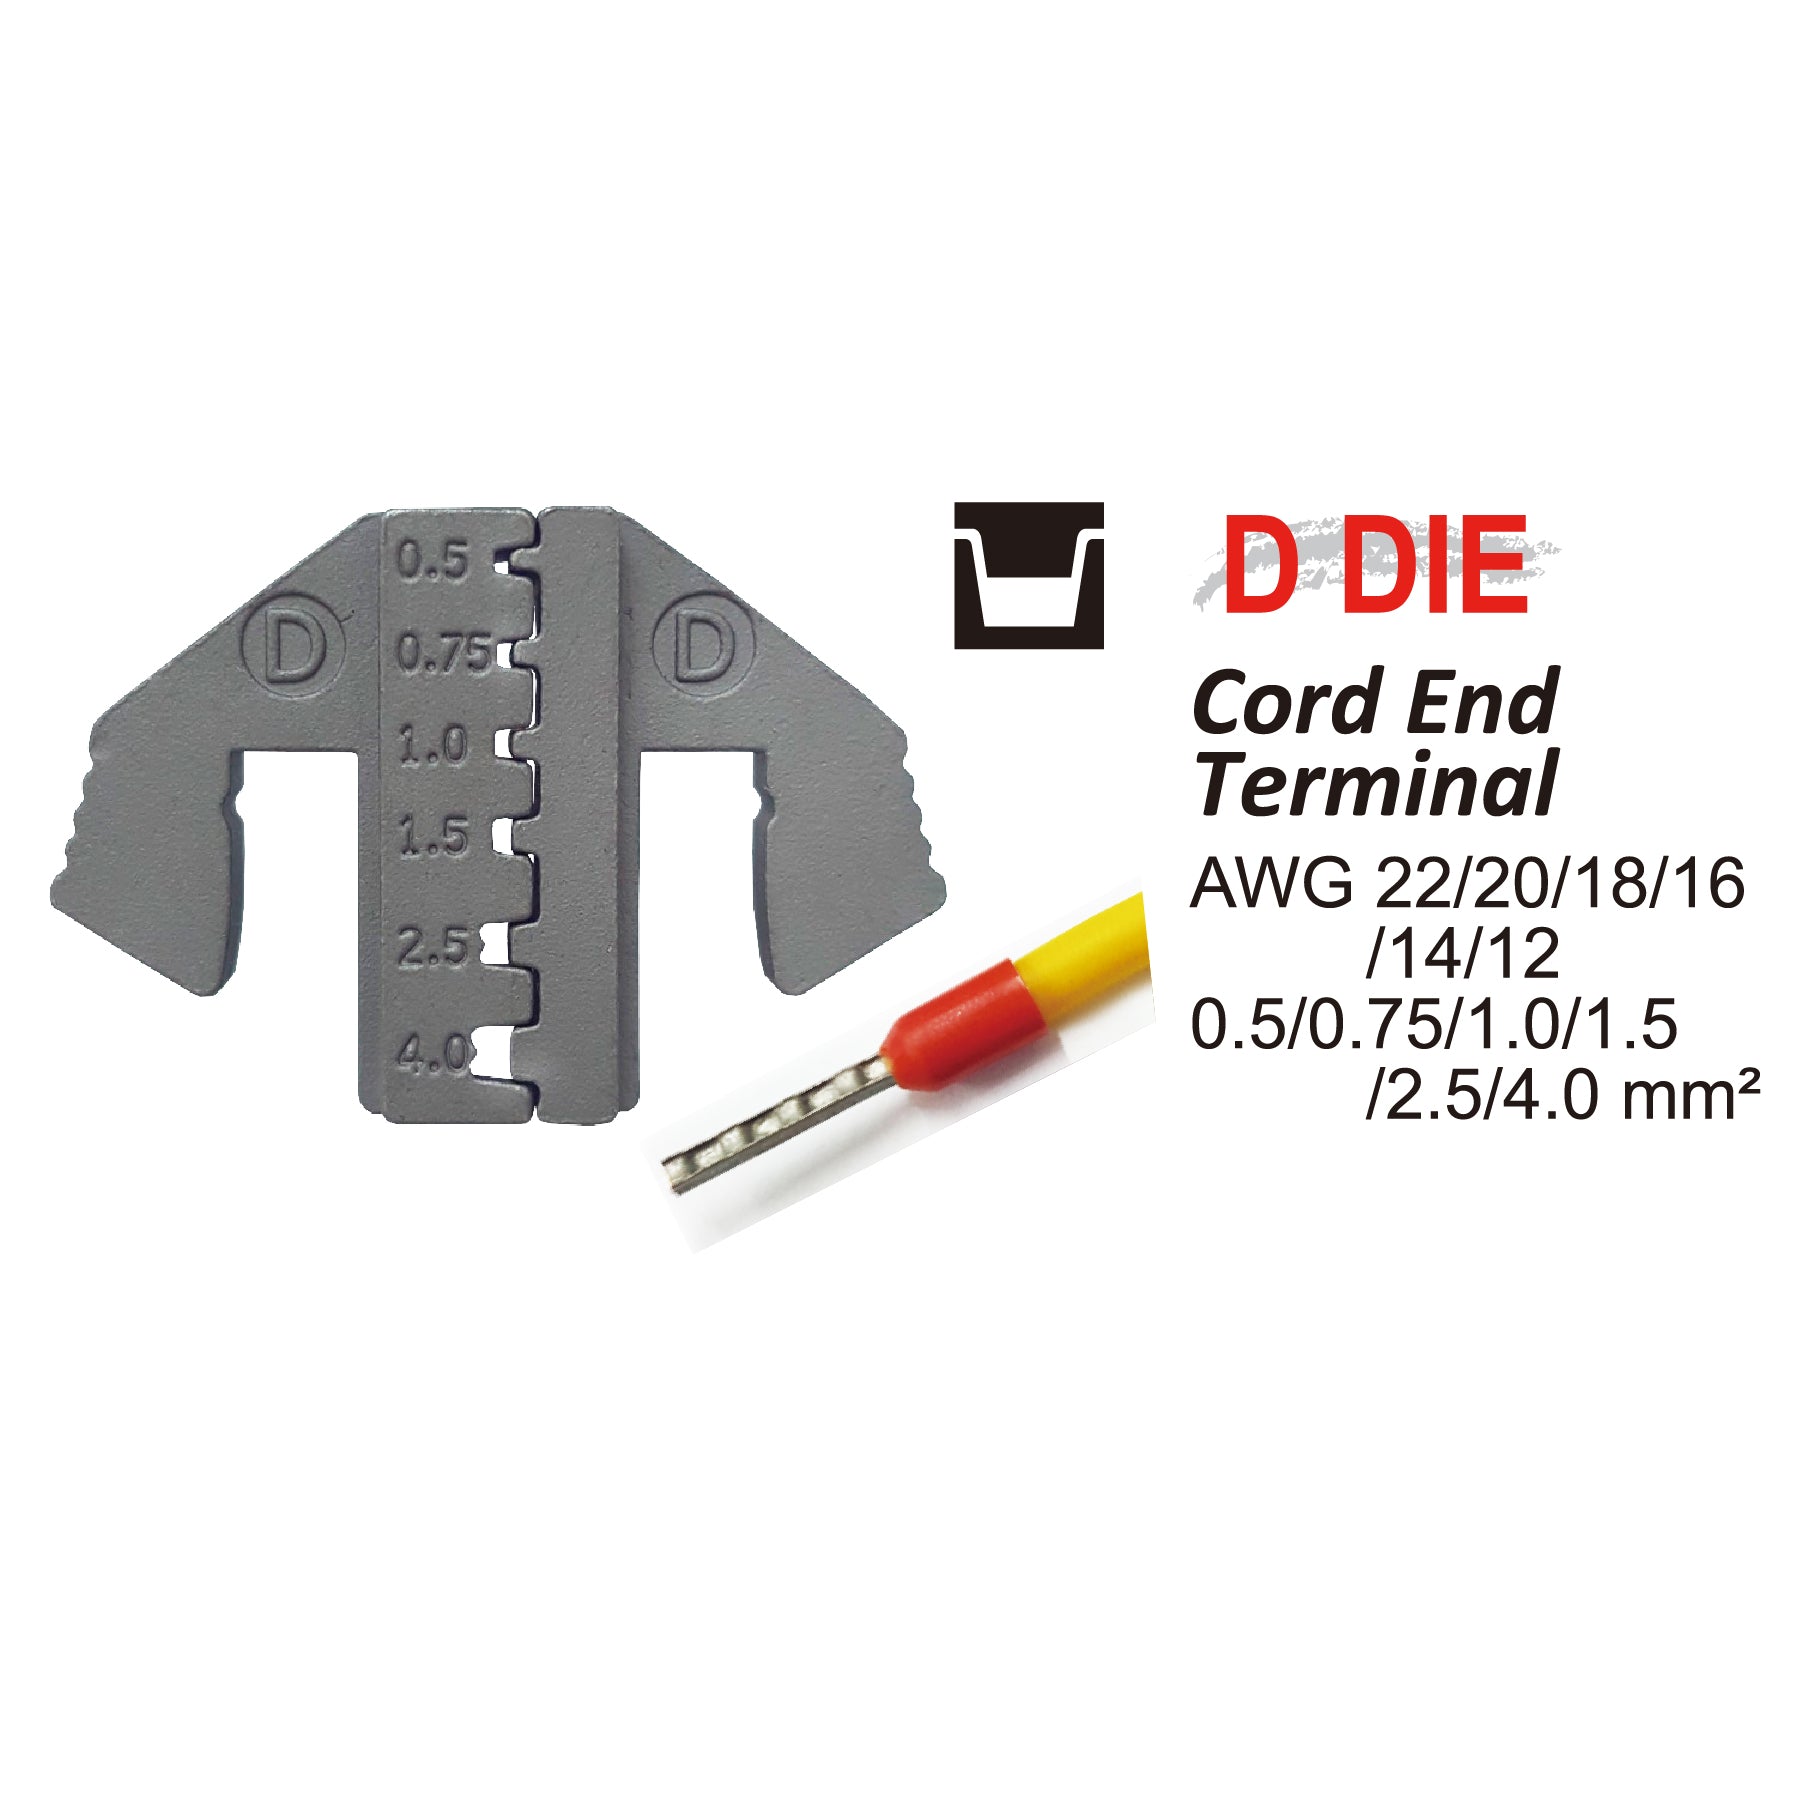 Crimping Tool Die - D Die for Cord End Terminals AWG 20/18/17/16/14/12 - Tool Guy Republic